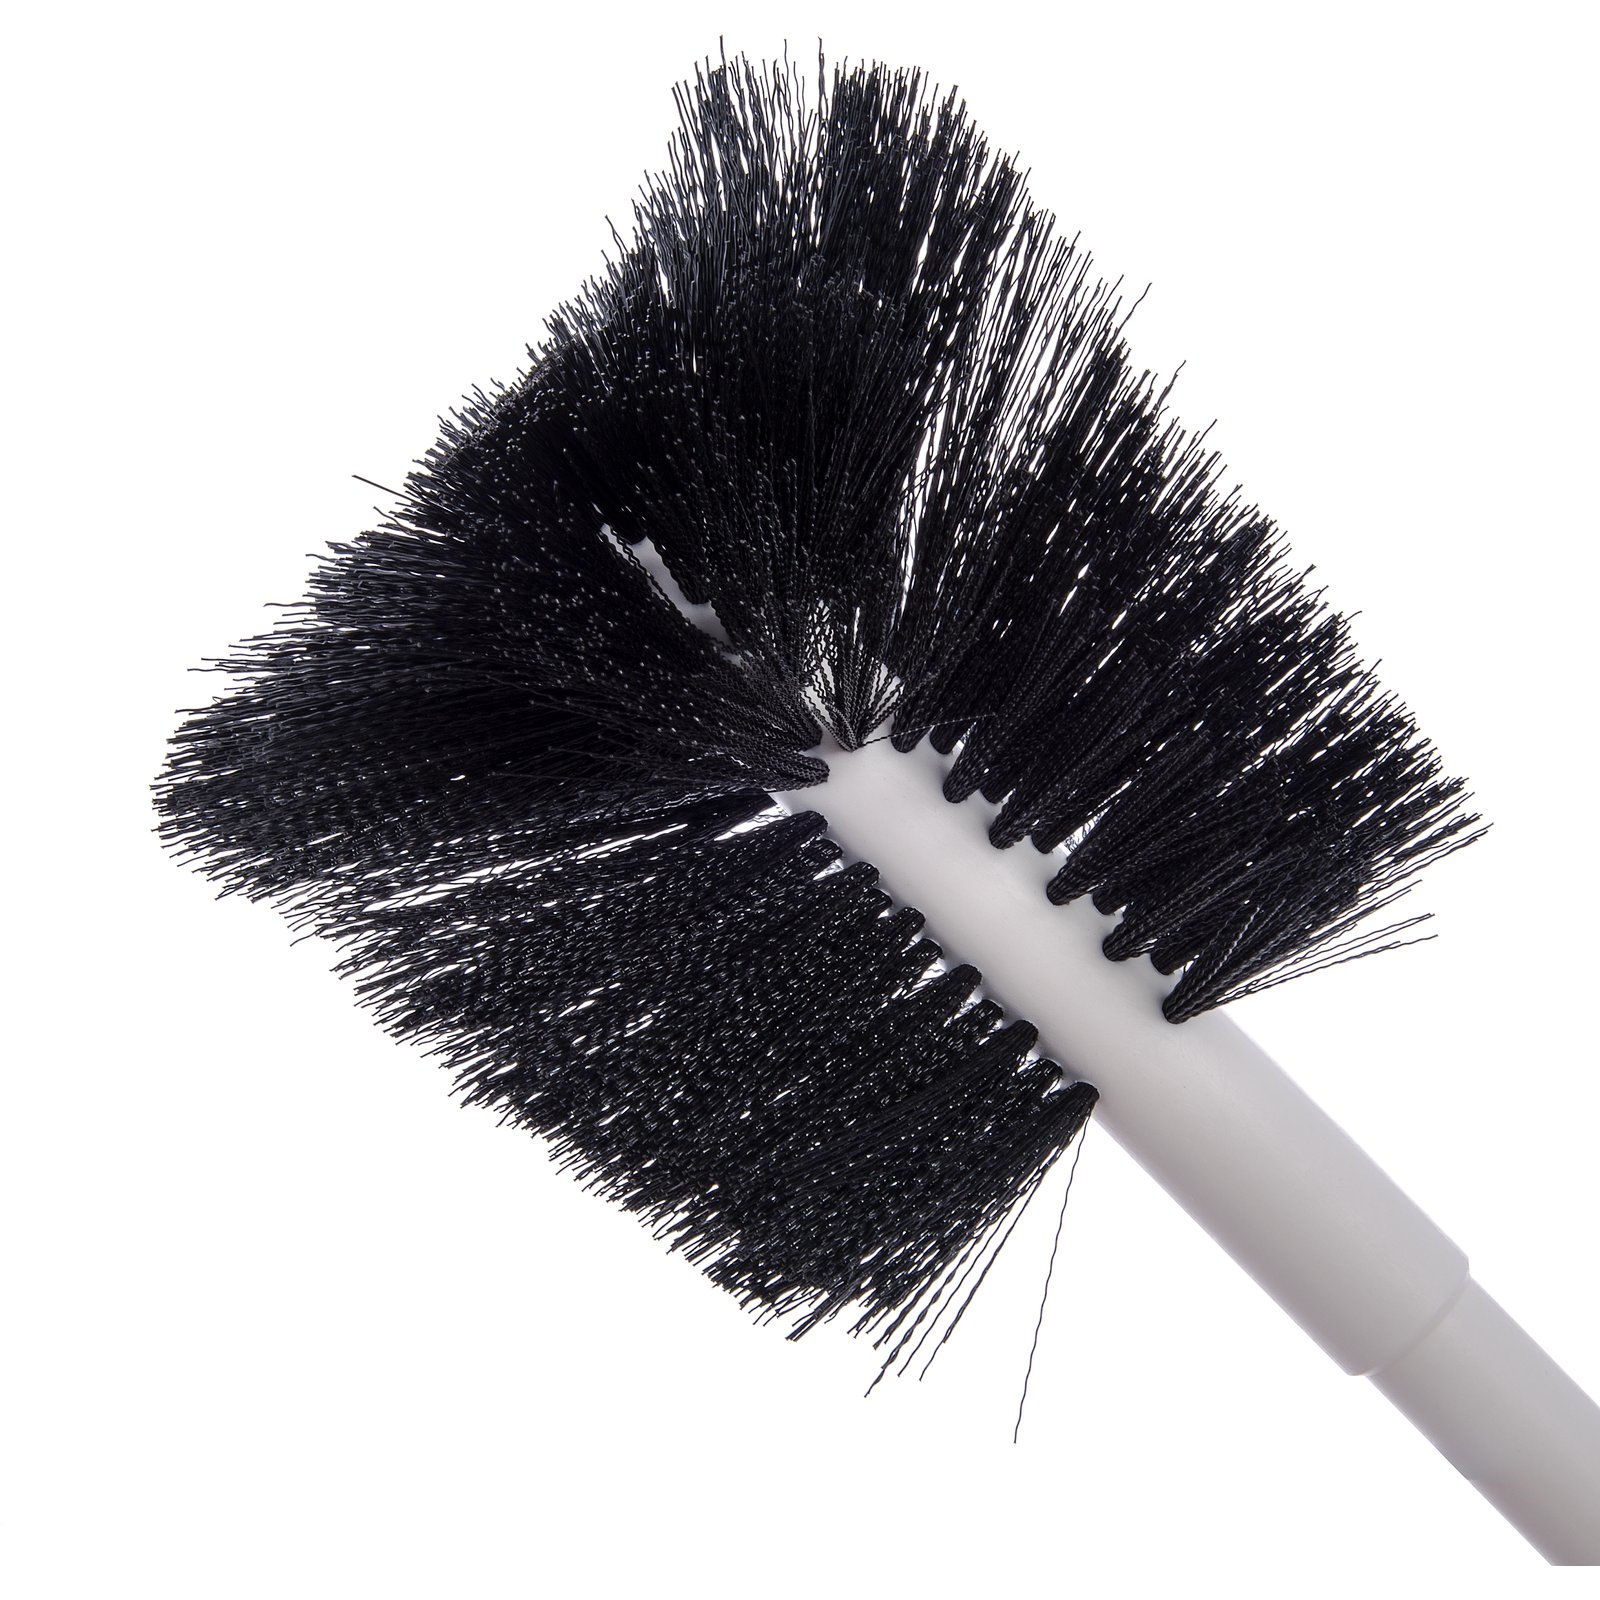 Thunder Group 10 Coffee Decanter Cleaning Brush